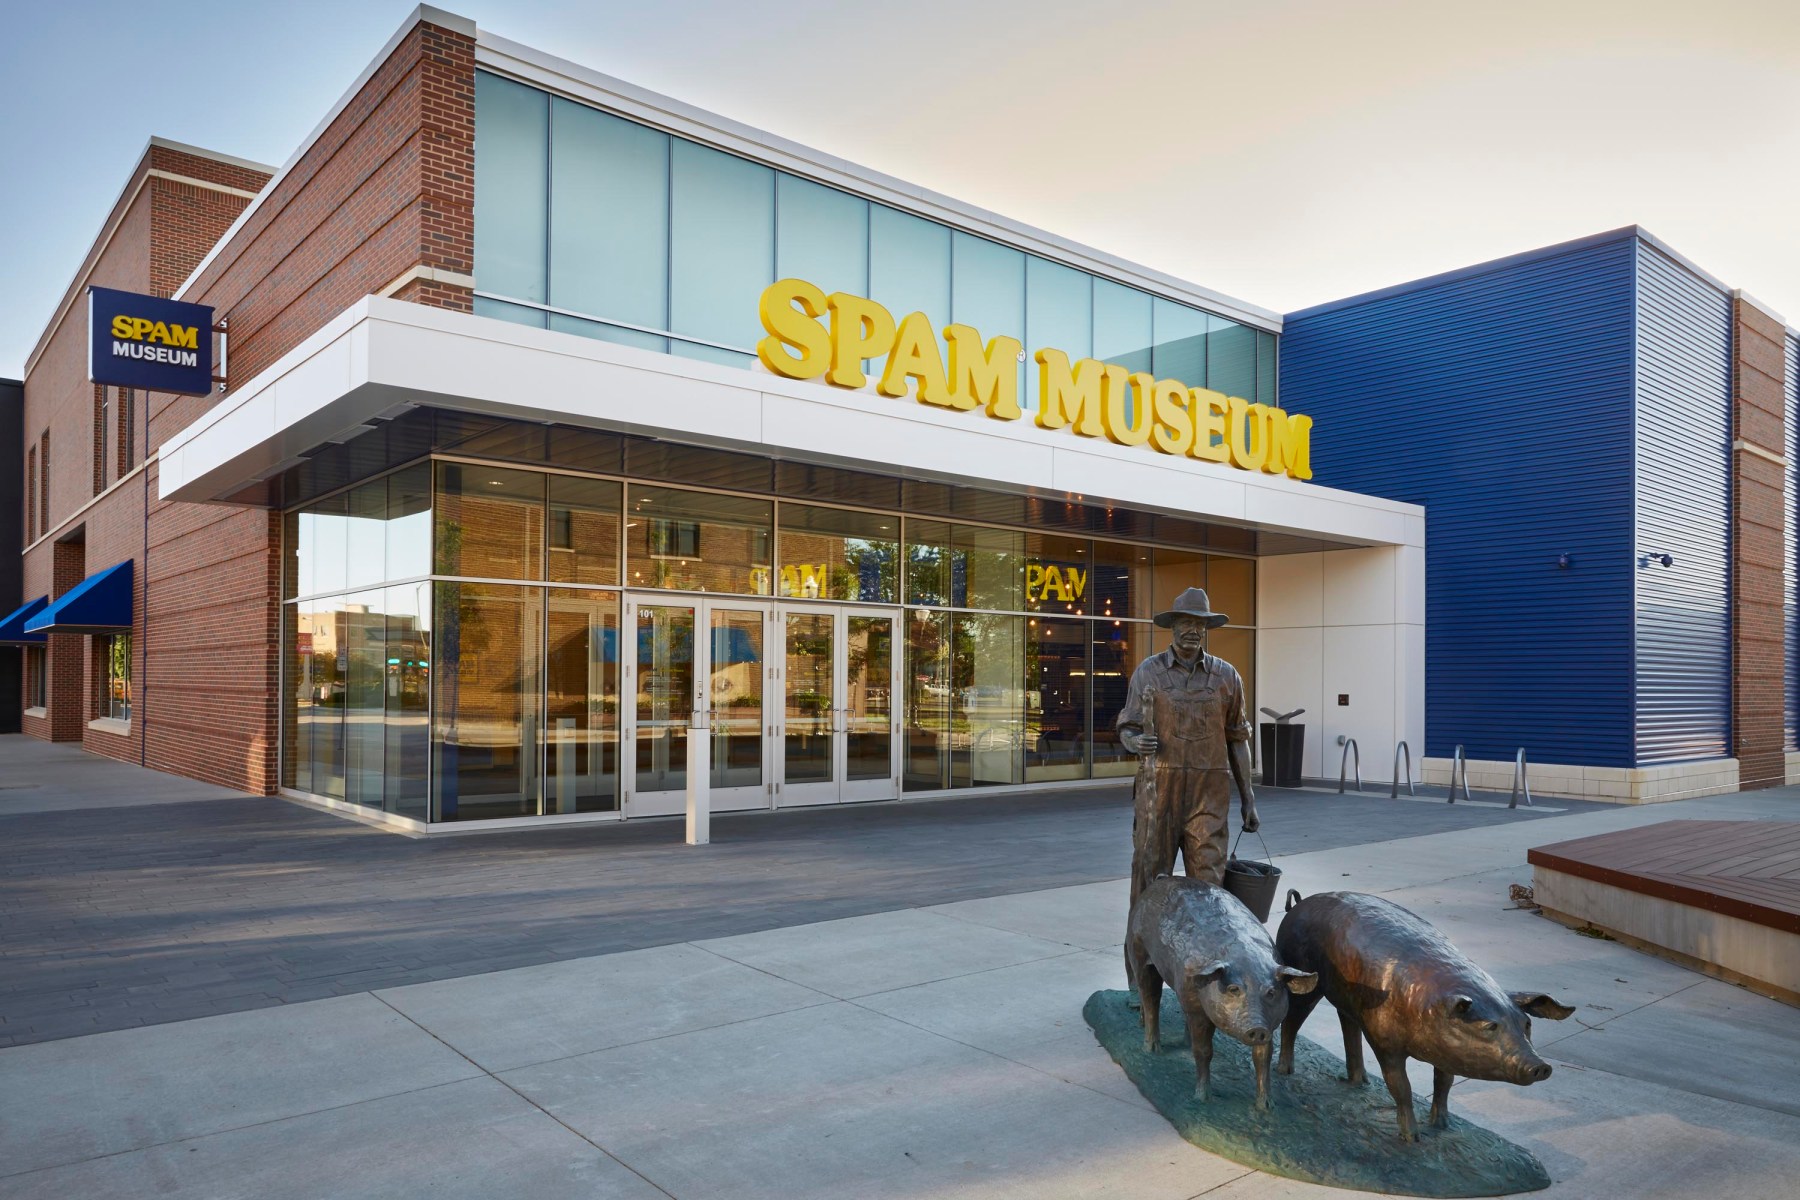 "<a href="https://www.spam.com/museum">The SPAM Museum</a> is an admission-free museum in Austin, Minnesota, dedicated to the SPAM Brand and Hormel Foods Corporation. The museum tells the history of the Hormel company, the origin of Spam and its place in world culture."